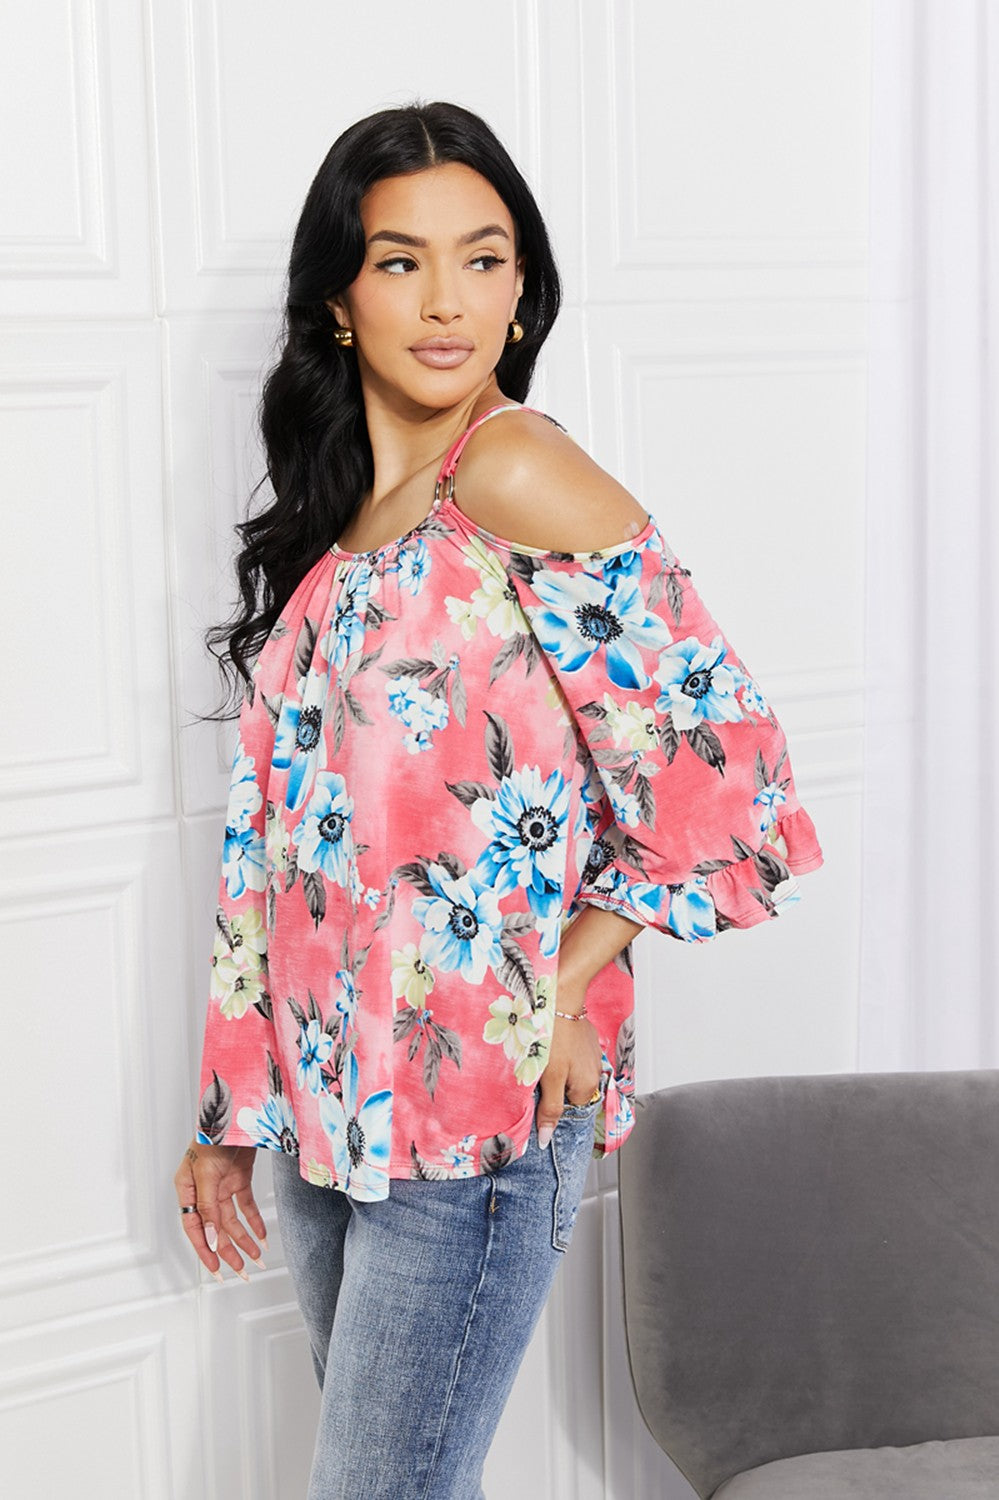 Sew In Love Fresh Take  Floral Cold-Shoulder Top Sew In Love